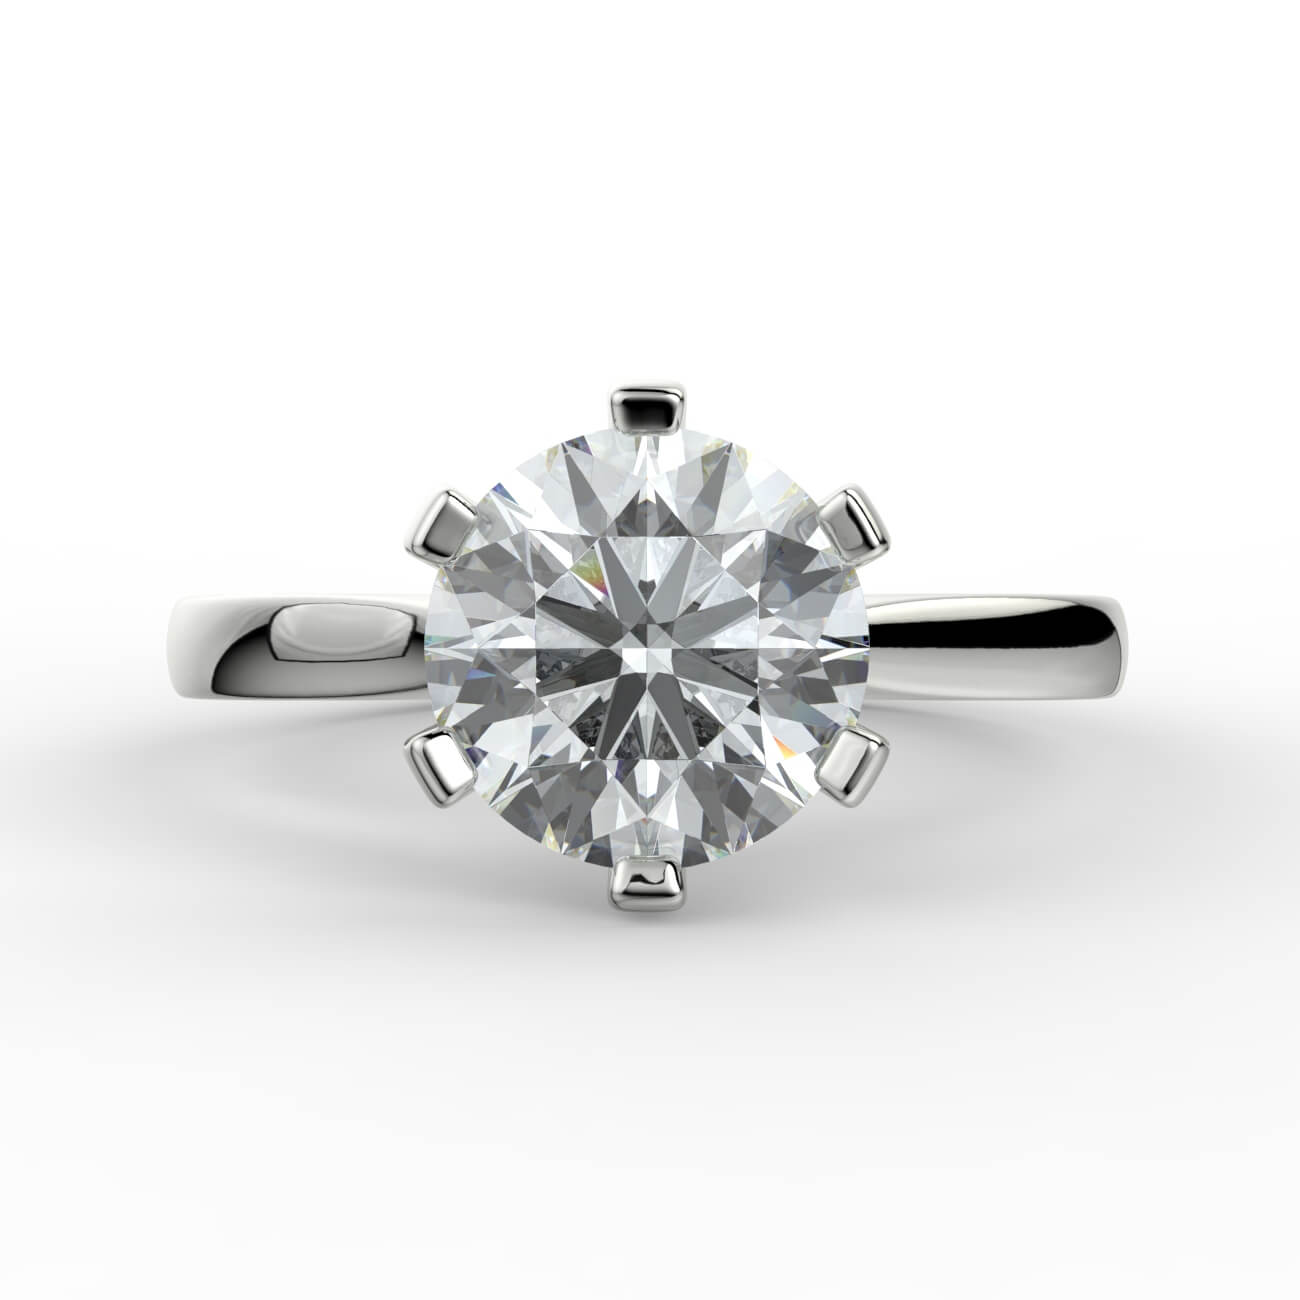 Round brilliant cut diamond cathedral engagement ring in white gold – Australian Diamond Network